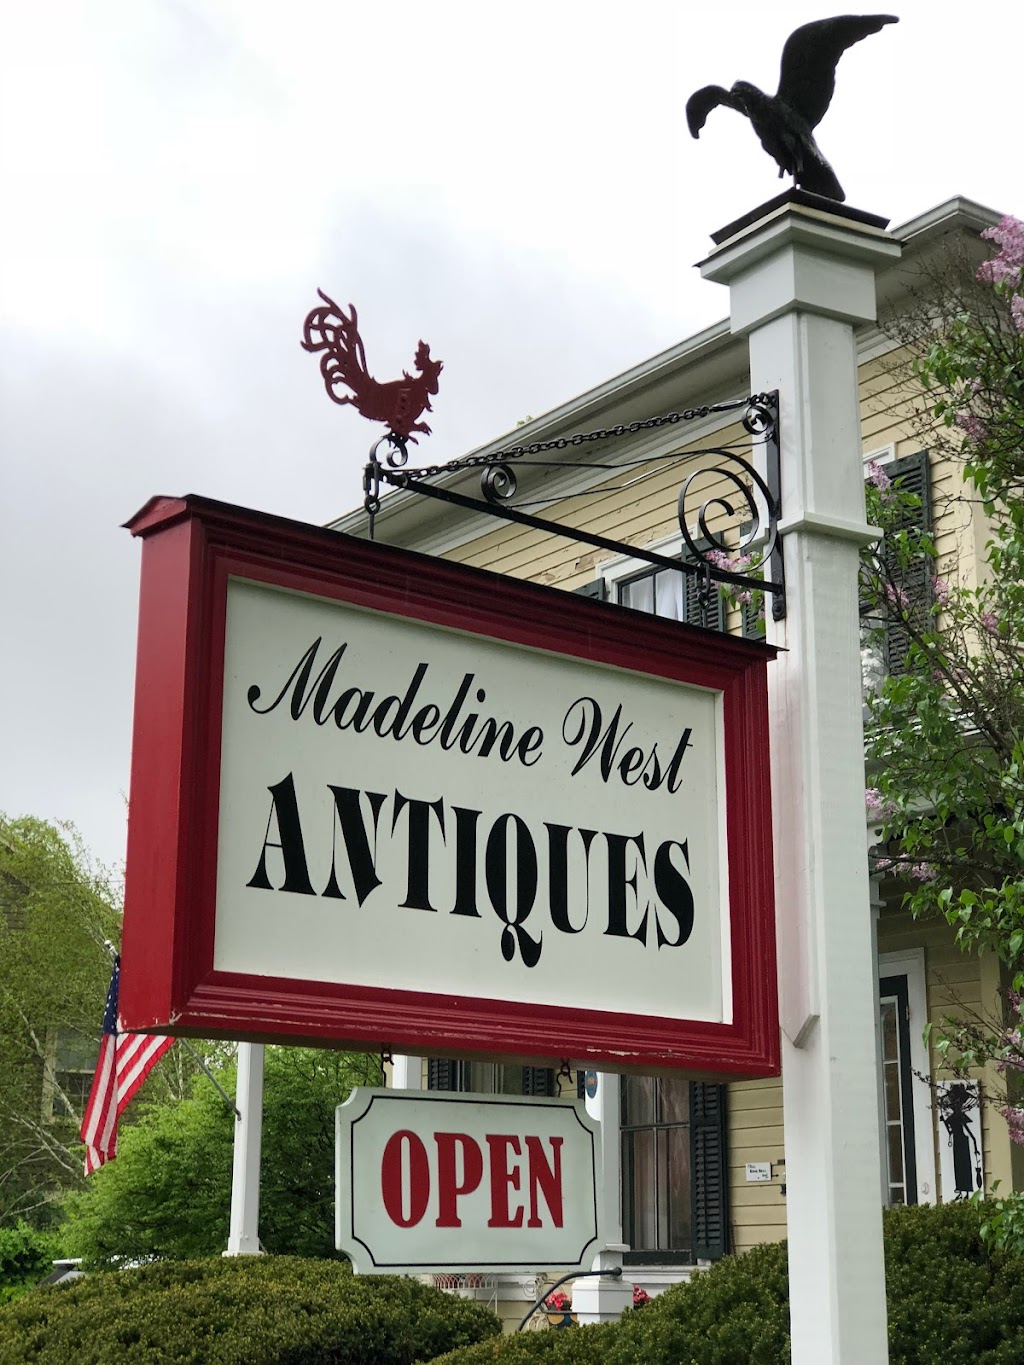 Madeline West Antiques | 373 Main St S, Woodbury, CT 06798 | Phone: (203) 263-4604